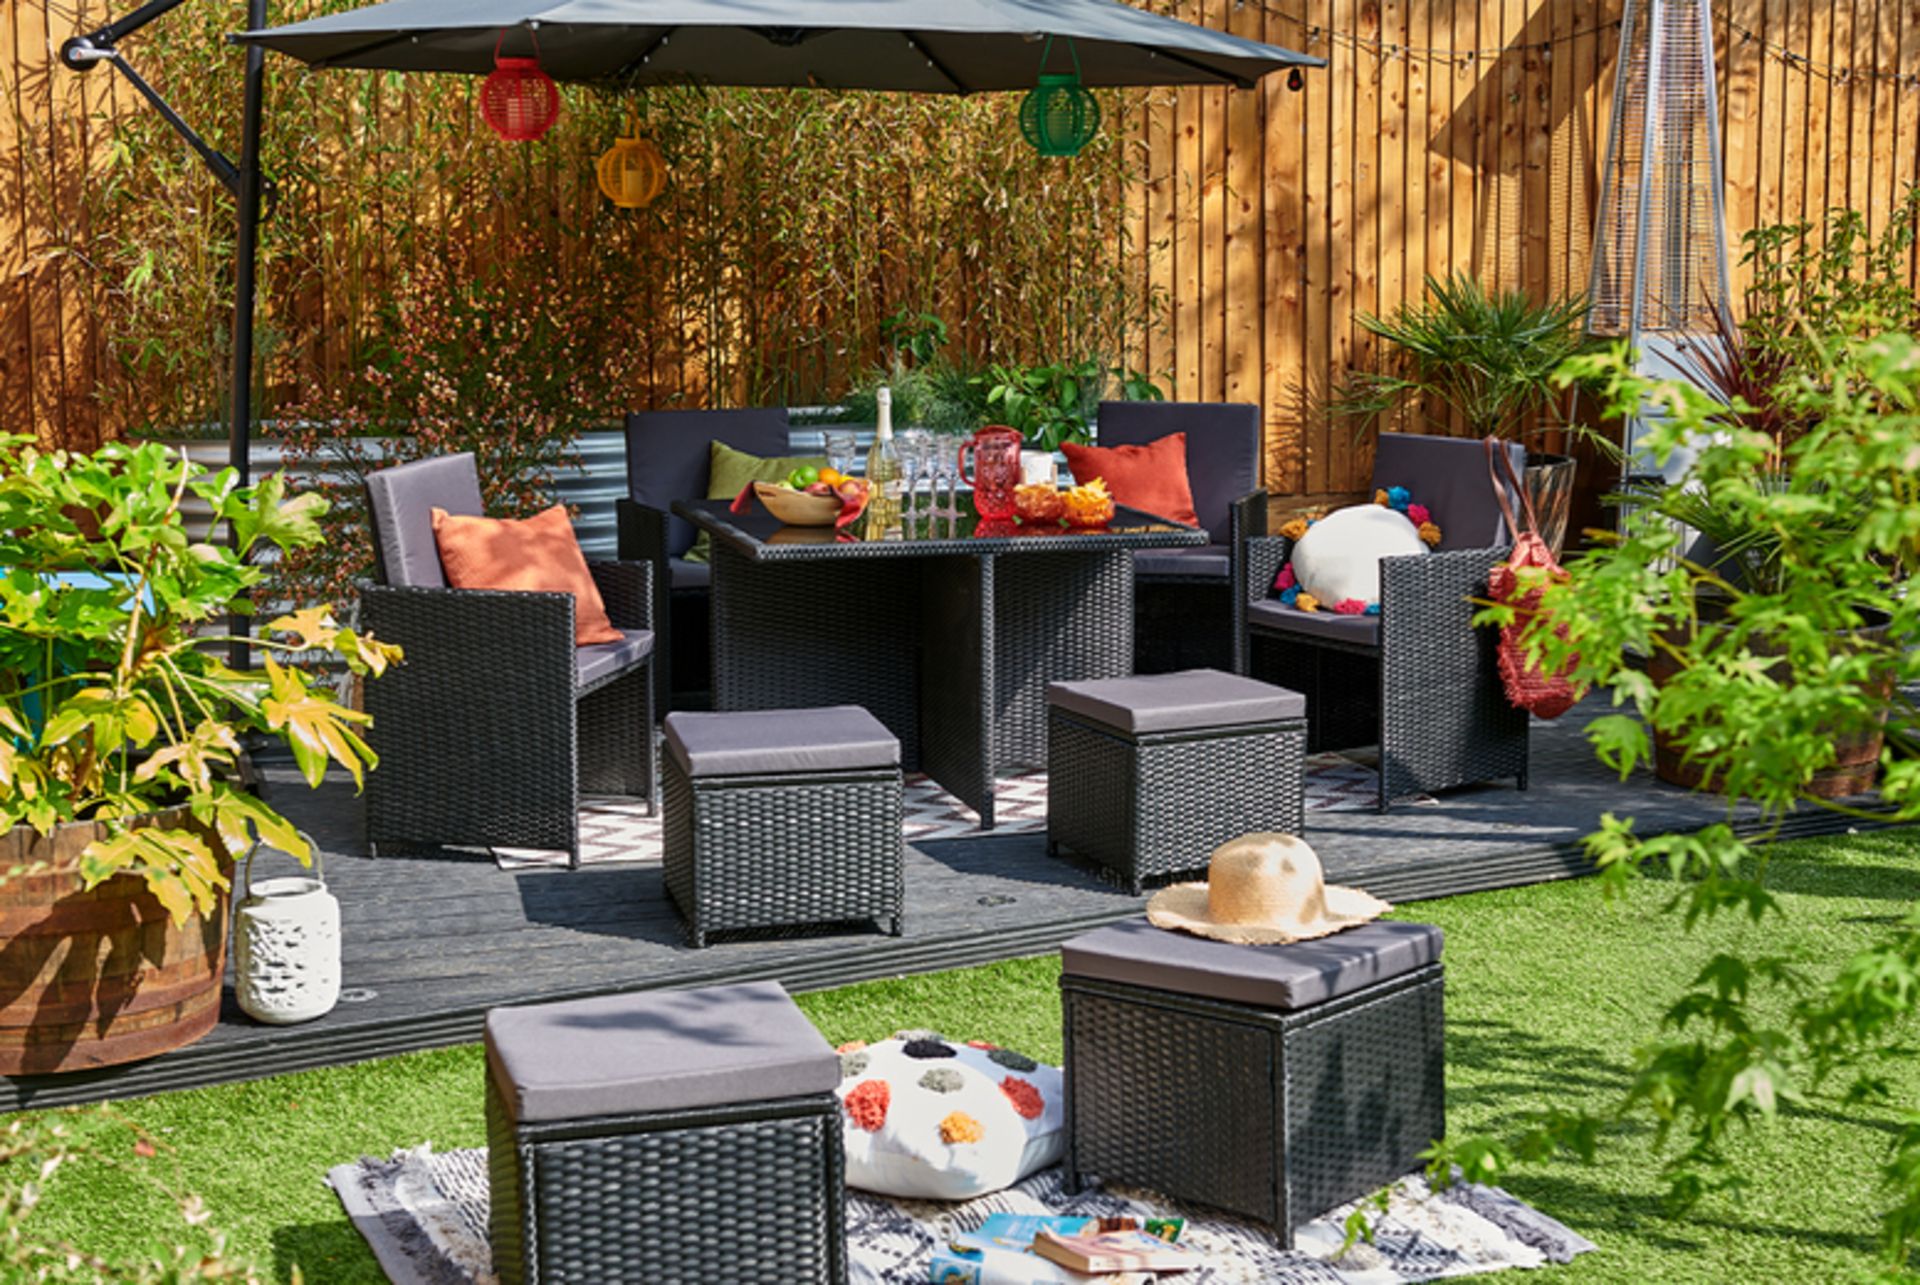 FREE DELIVERY - 8-SEATER RATTAN CUBE GARDEN FURNITURE DINING SET - BLACK